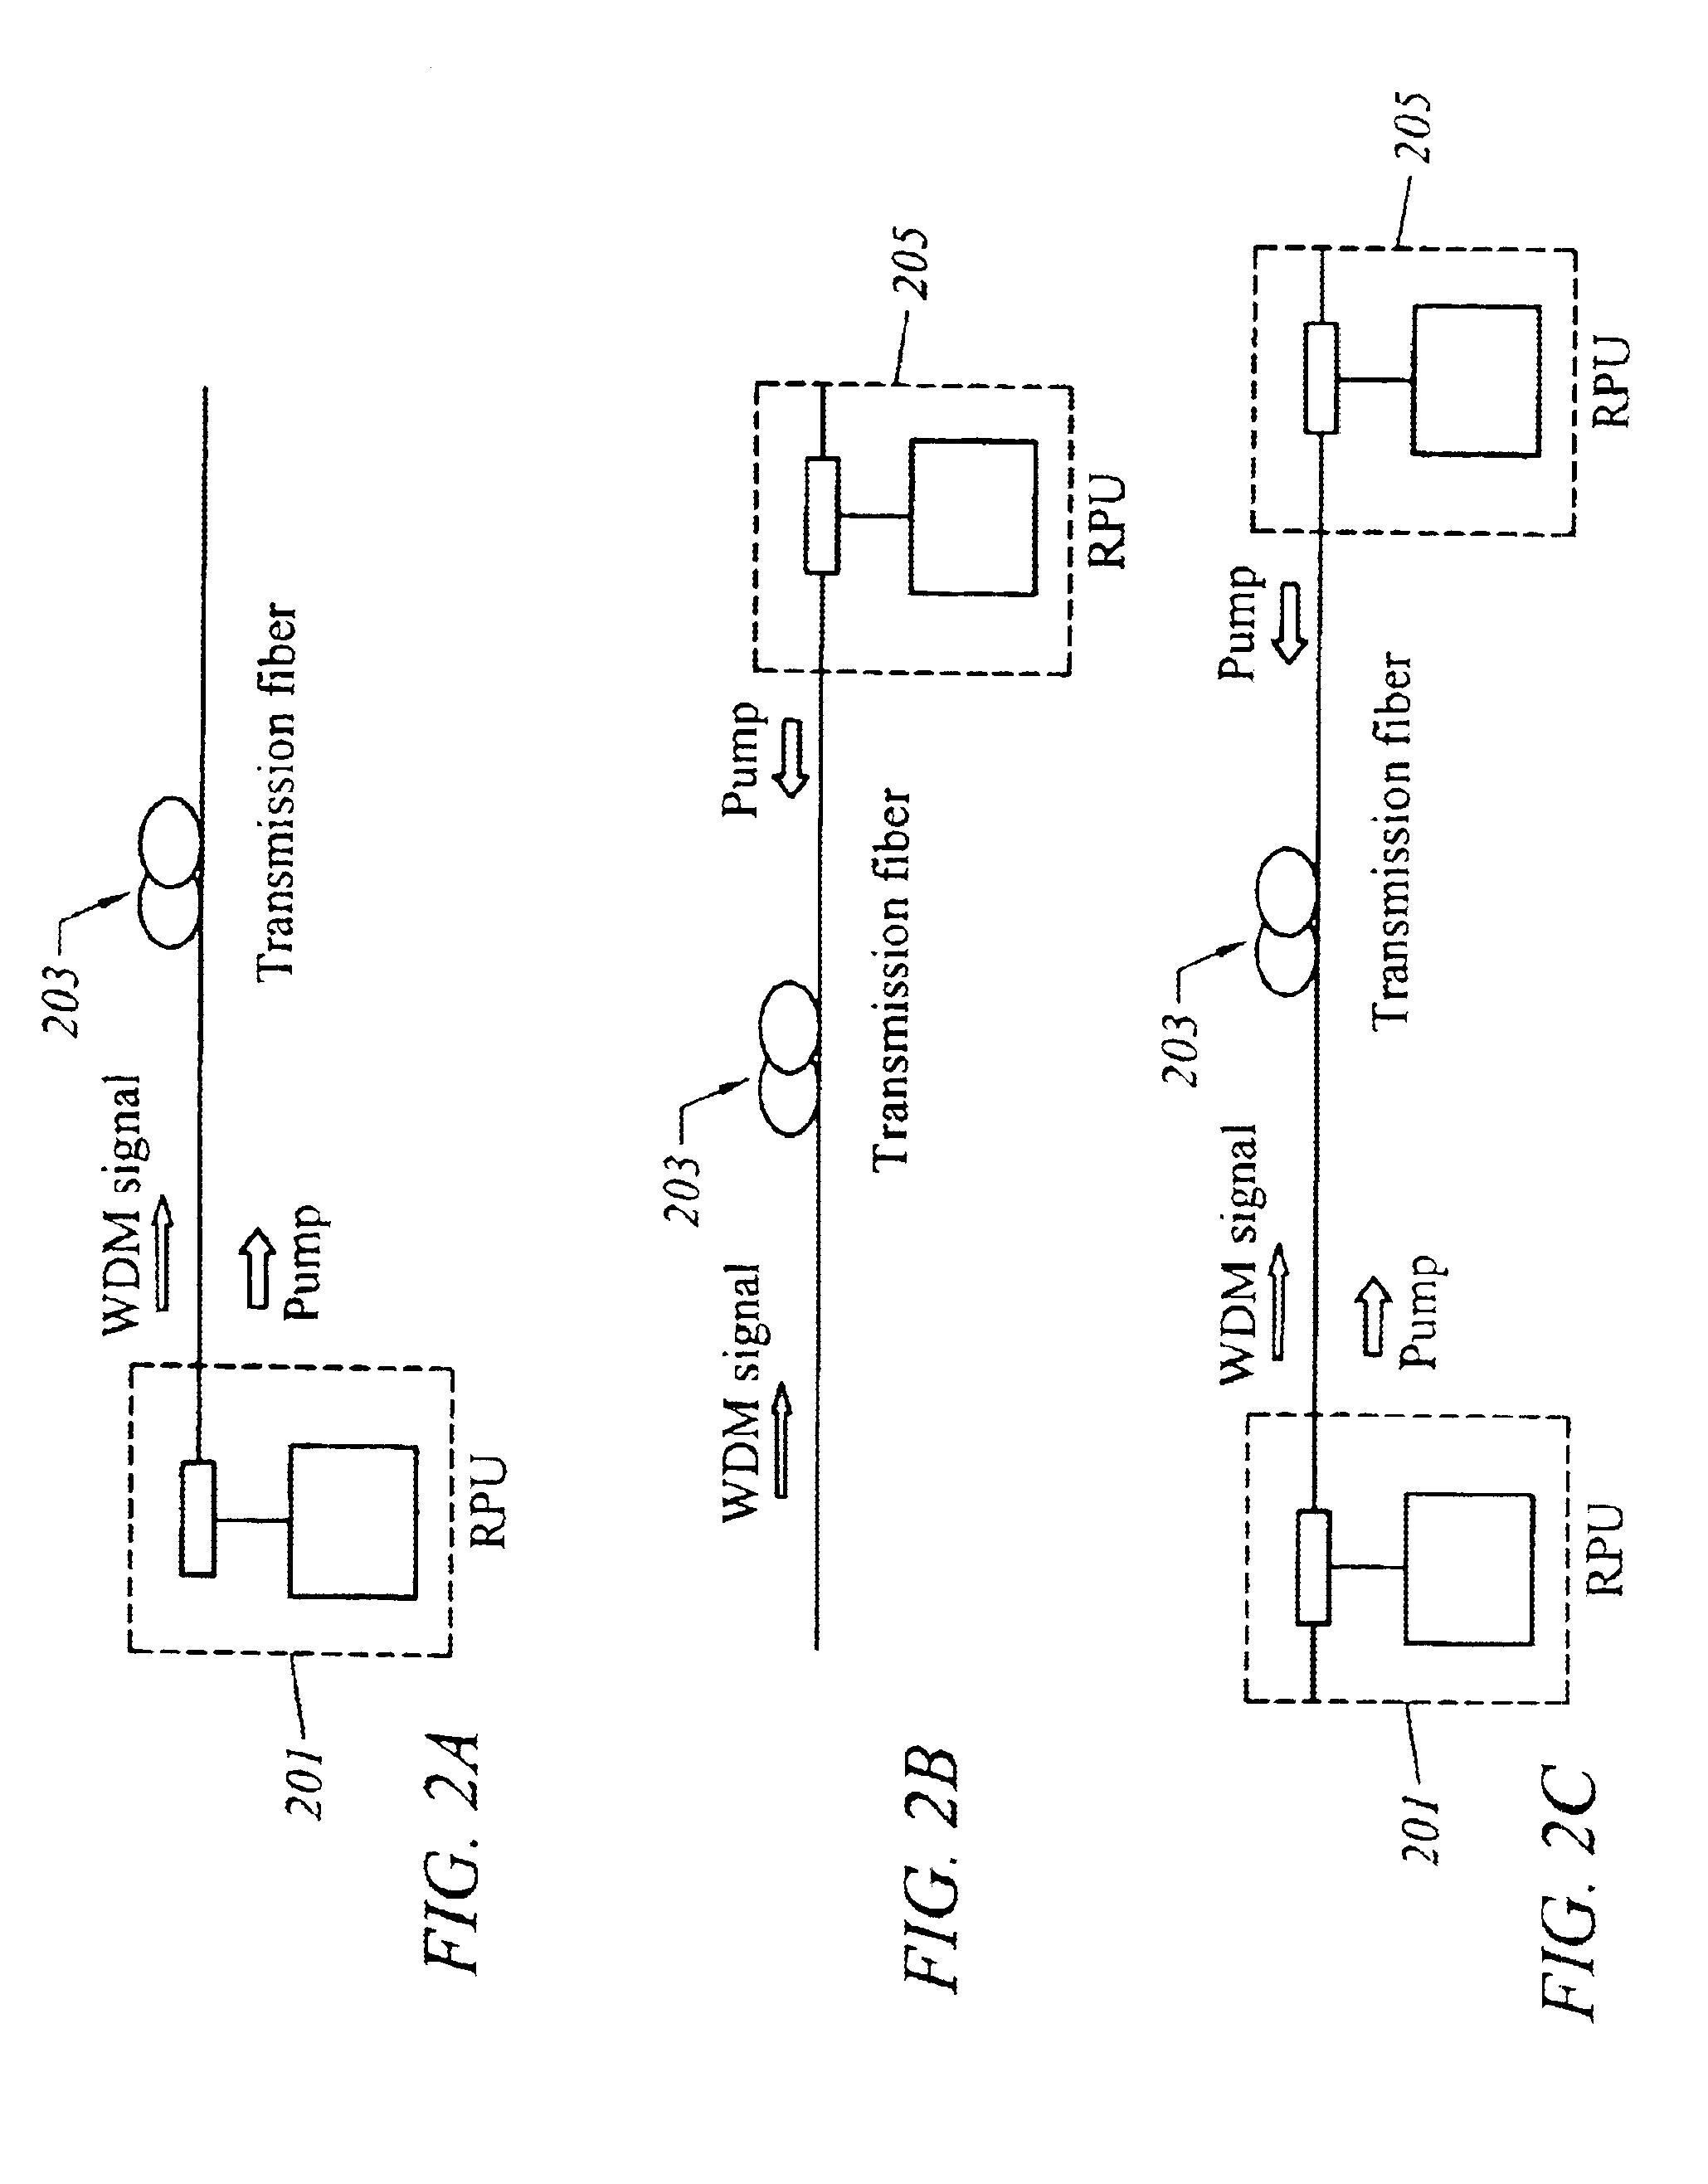 Automatic raman gain and tilt control for ultra-long-distance dense WDM optical communication system